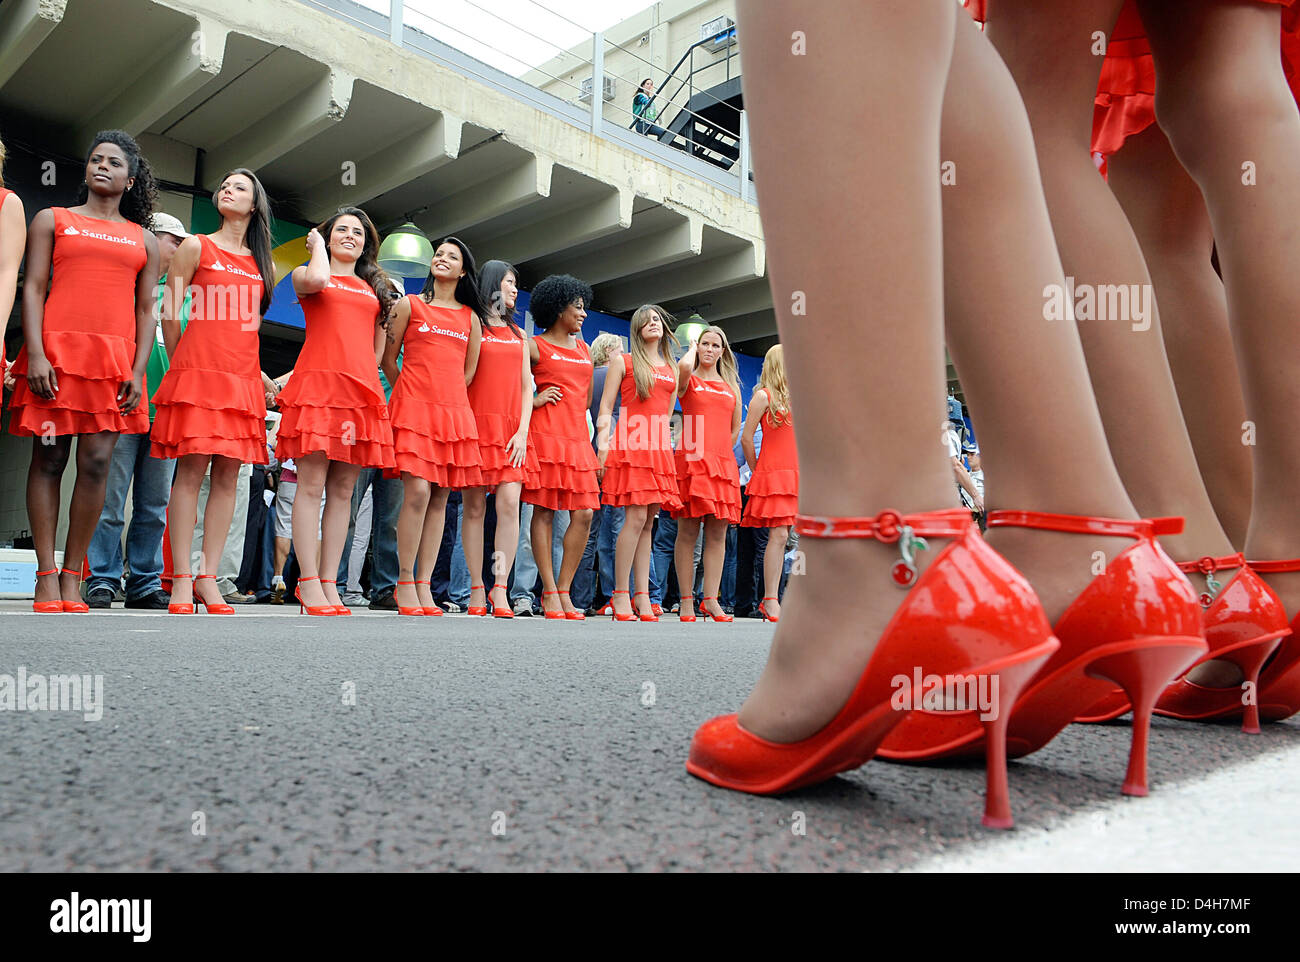 Grid girls stand in front of a garage at the pit lane area prior to the Formula One Grand Prix of Brazil at the race track in Interlagos near Sao Paulo, Brazil, 02 November 2008. Photo: GERO BRELOER Stock Photo